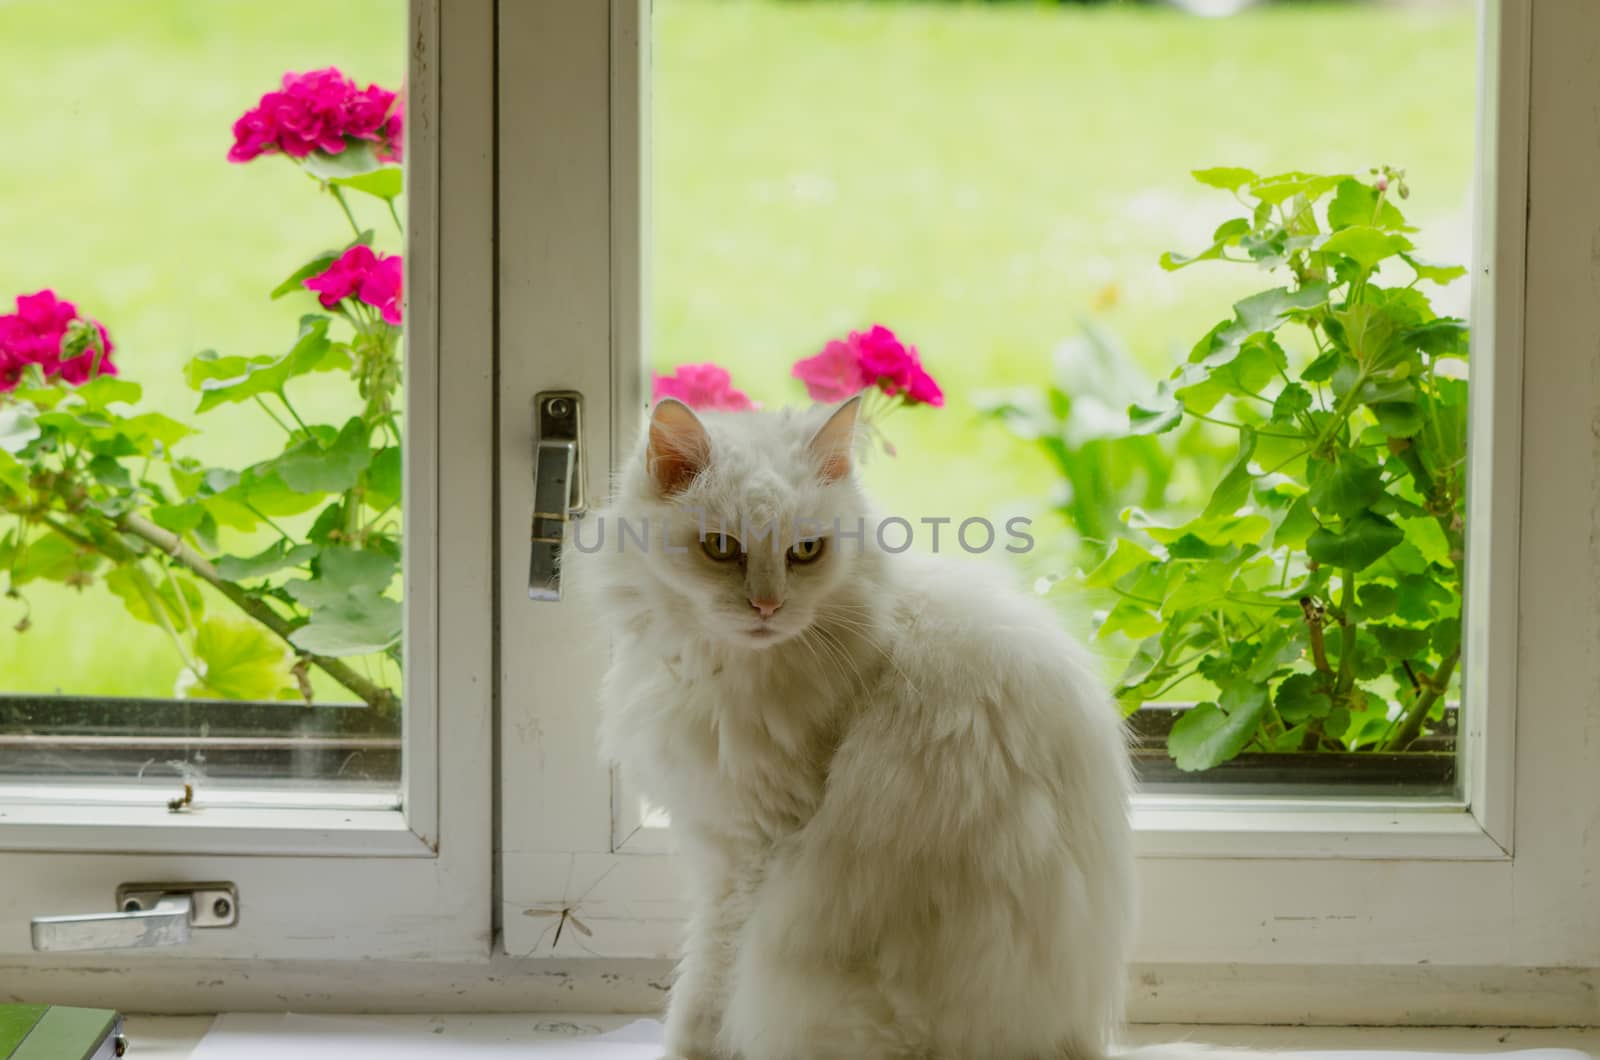 White old fluffy cat pet sit on sill in front of window and flowers on other side.